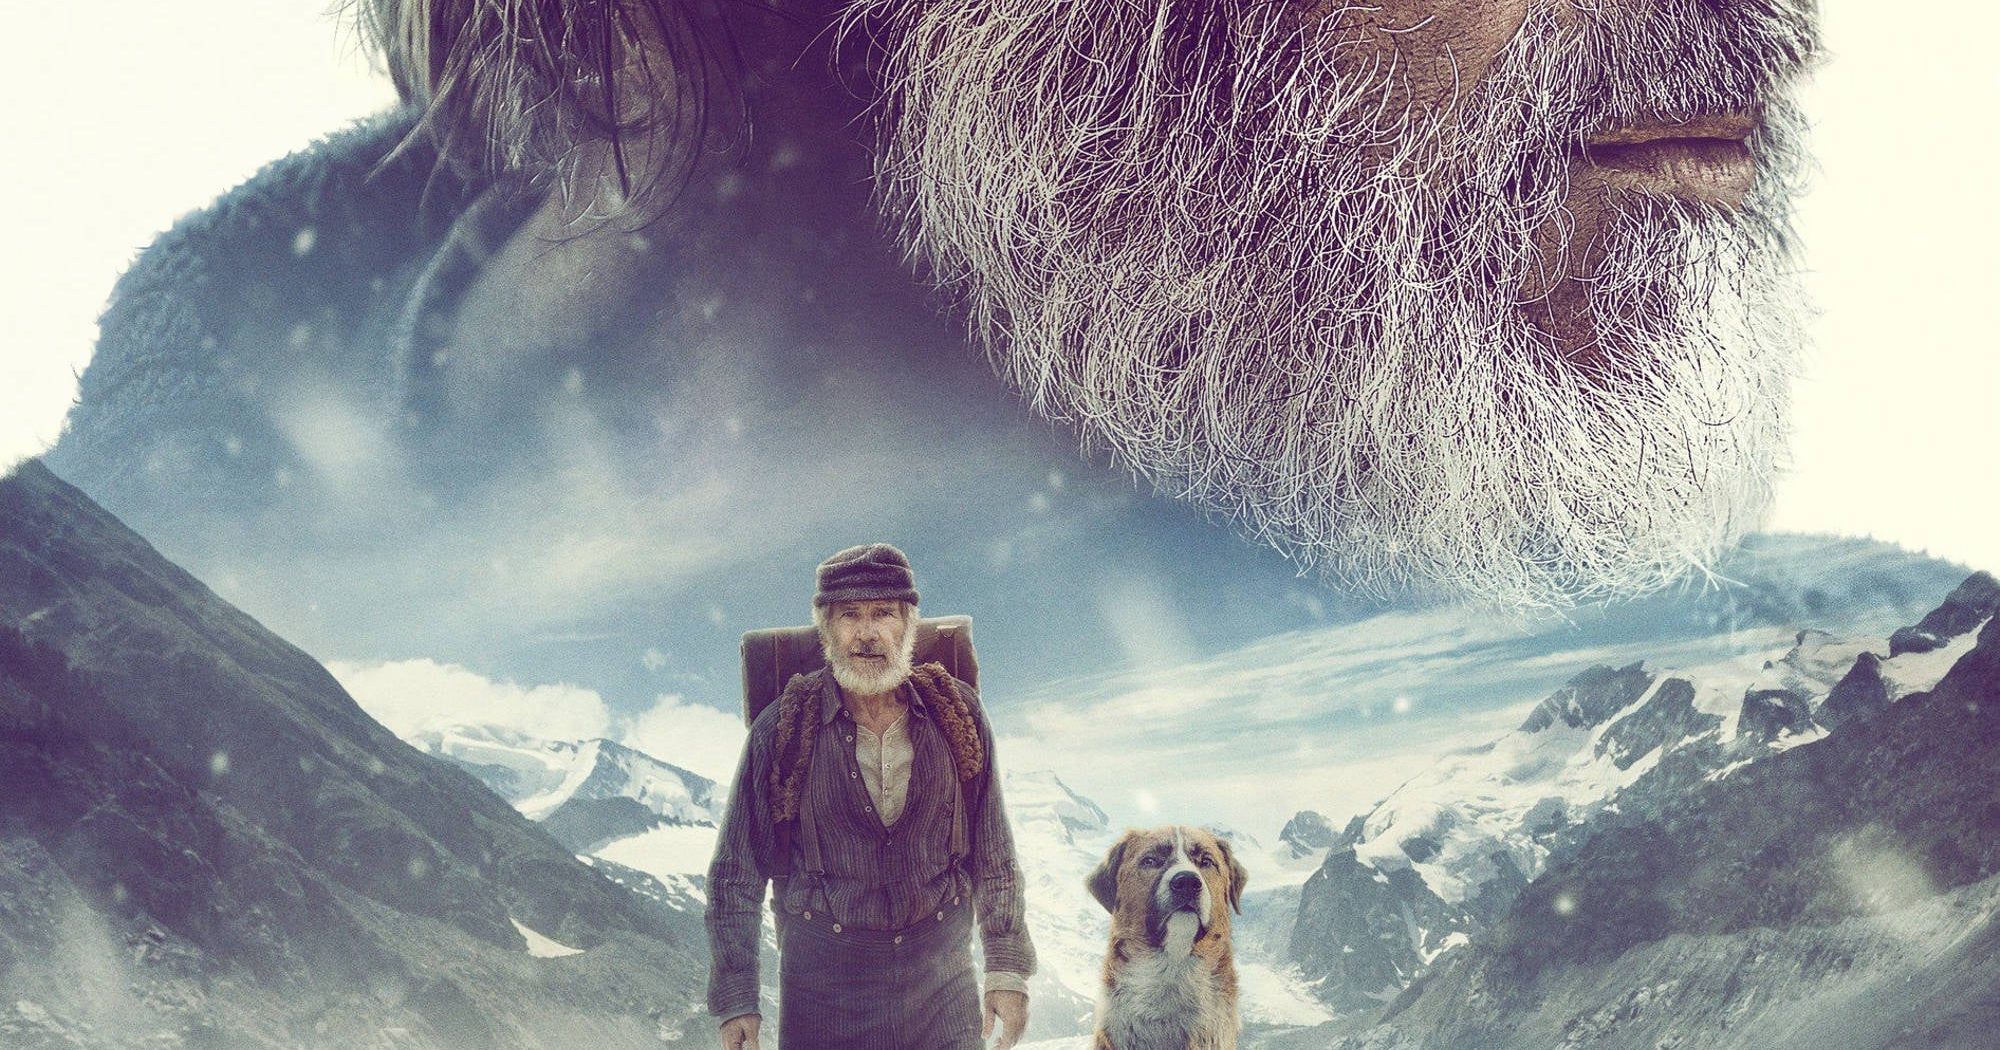 Poster for the movie "The Call of the Wild"